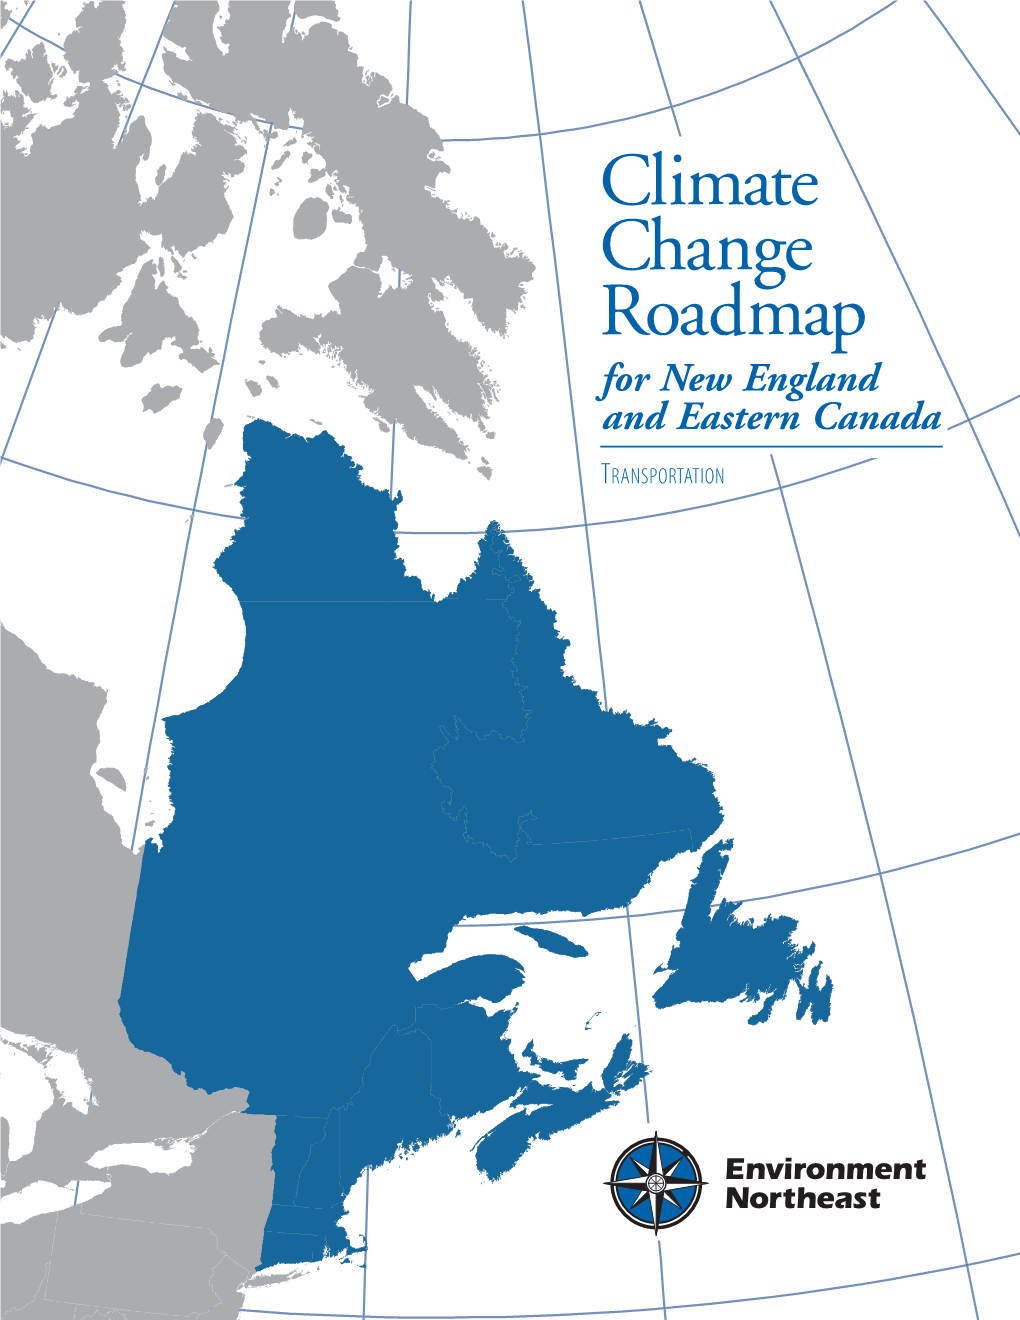 Climate Change Roadmap for New England and Eastern Canada